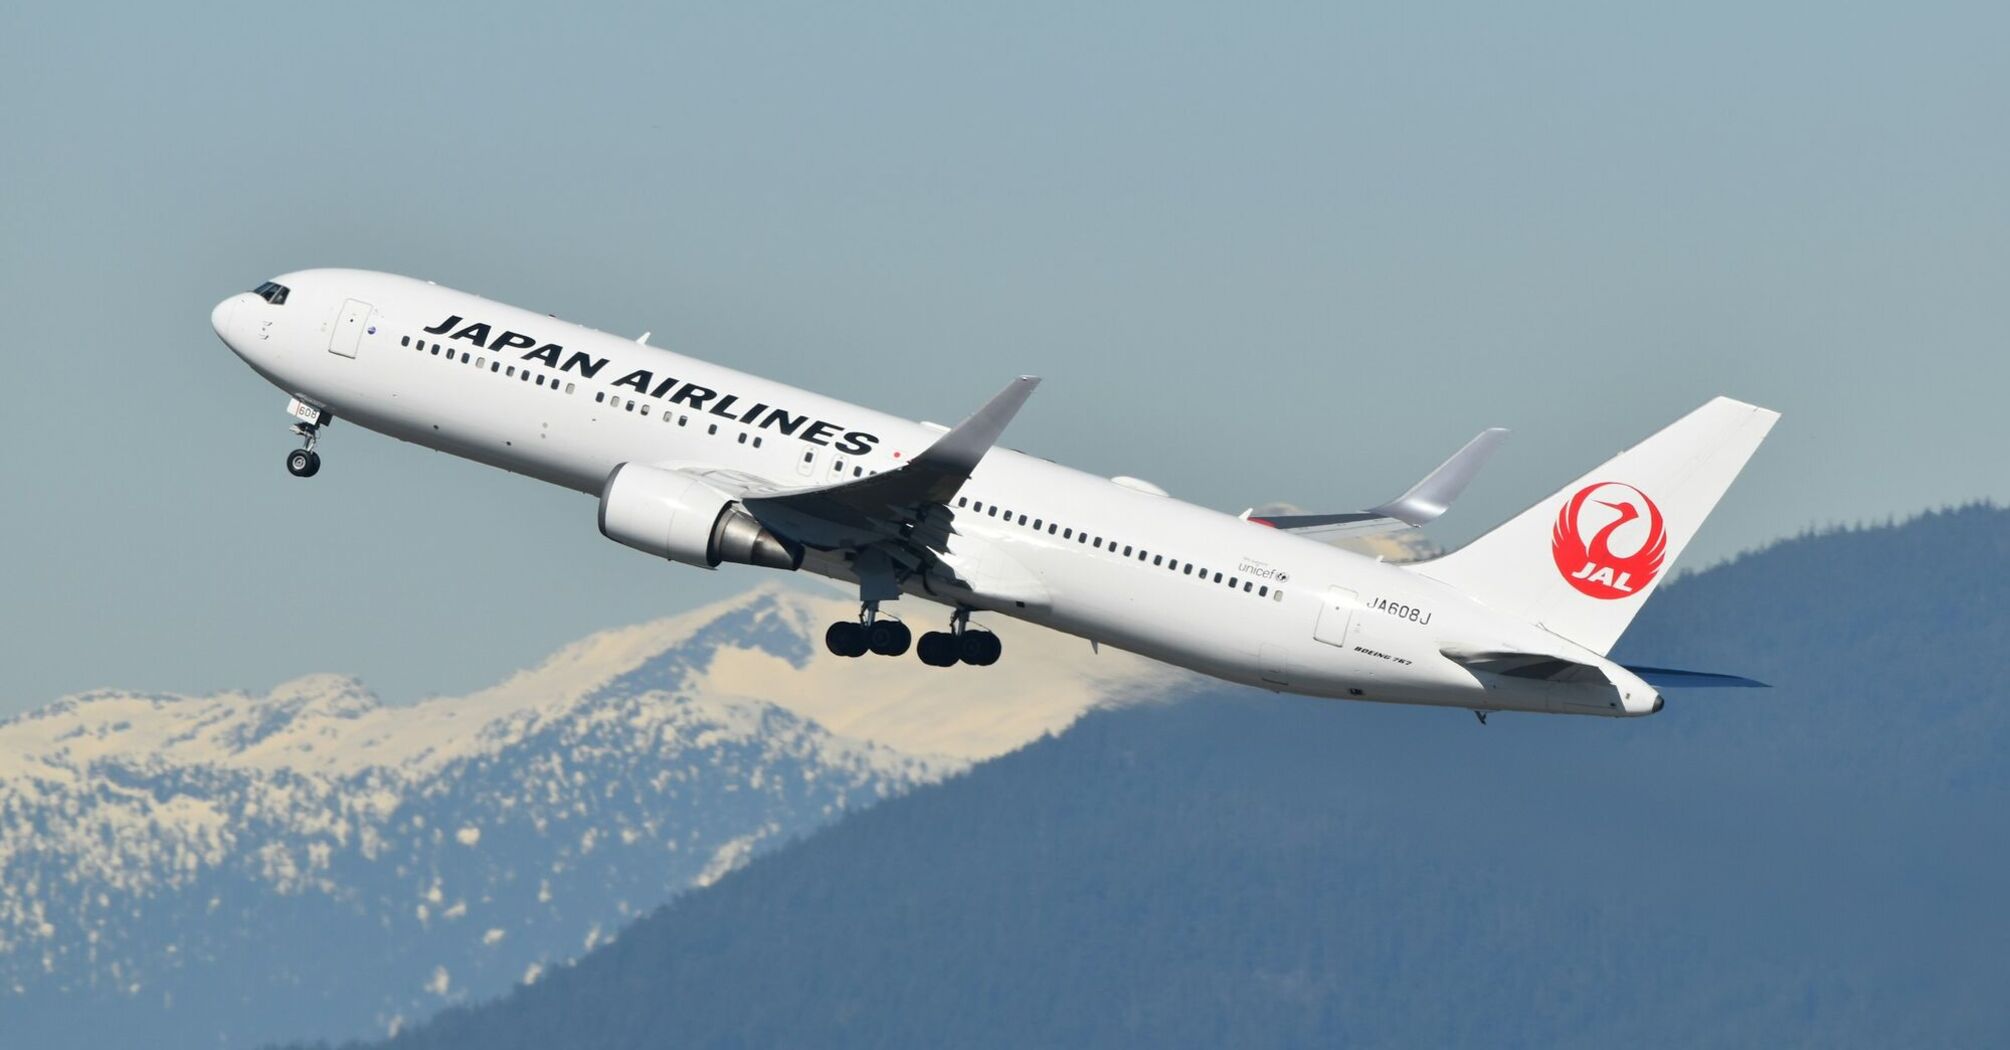 Japan Airlines plane taking off with mountains in the background